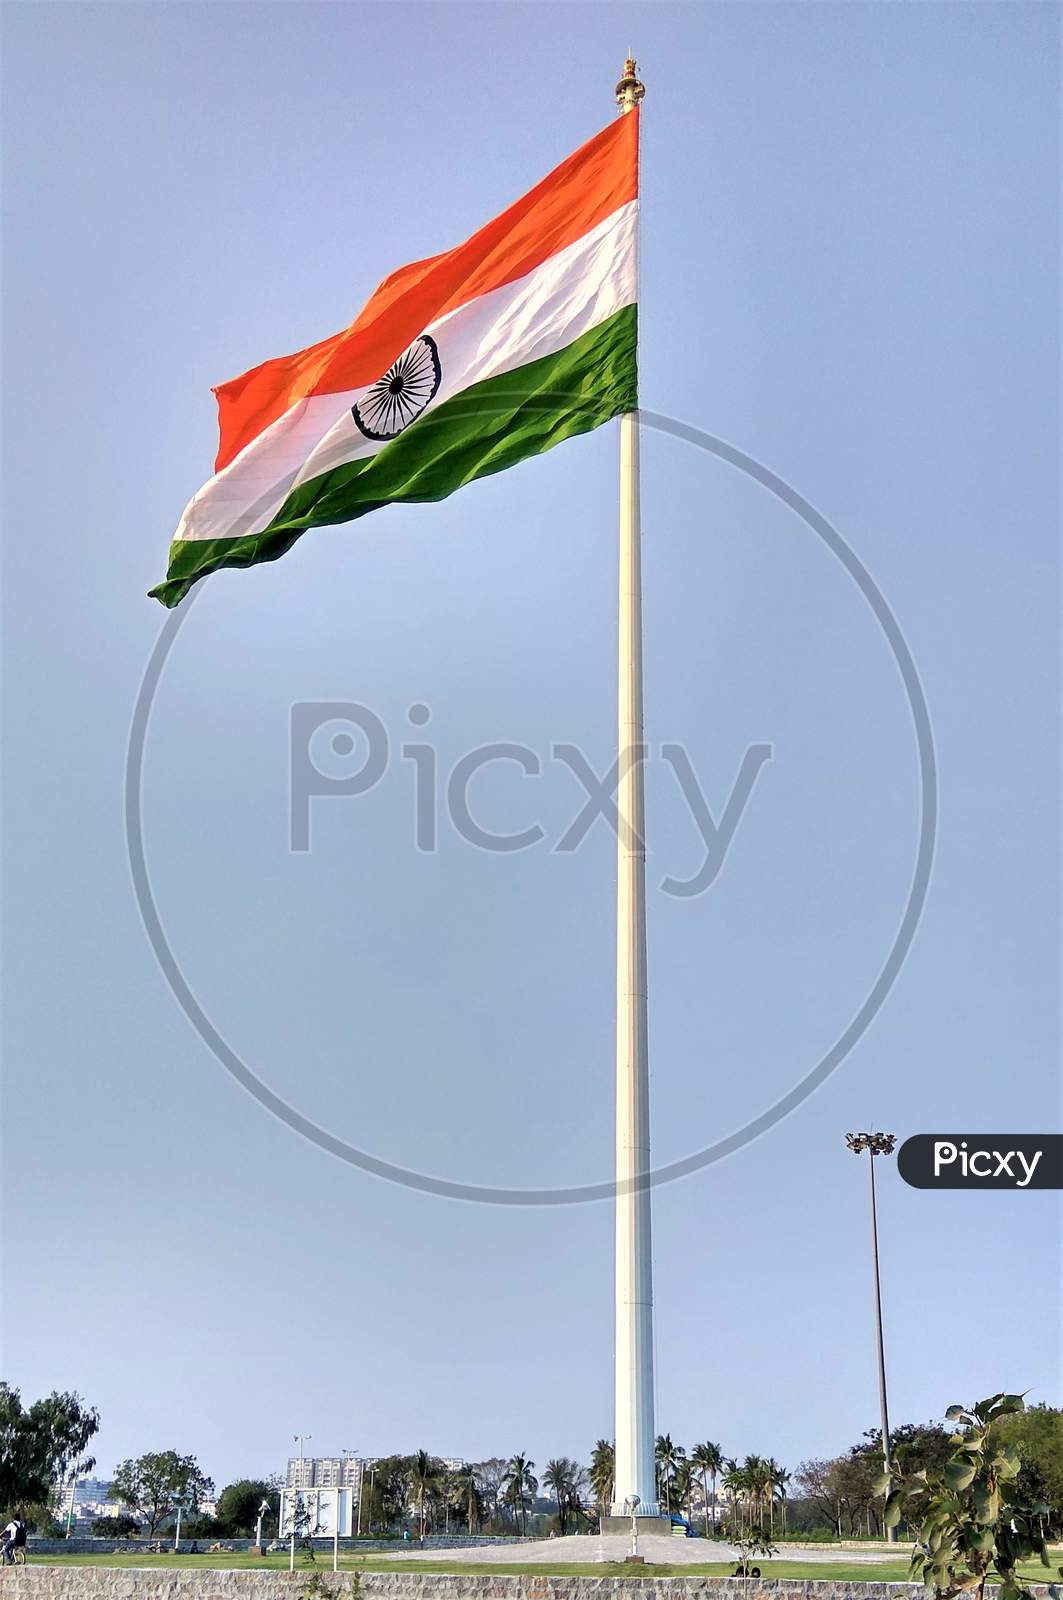 The second tallest Indian National Flag